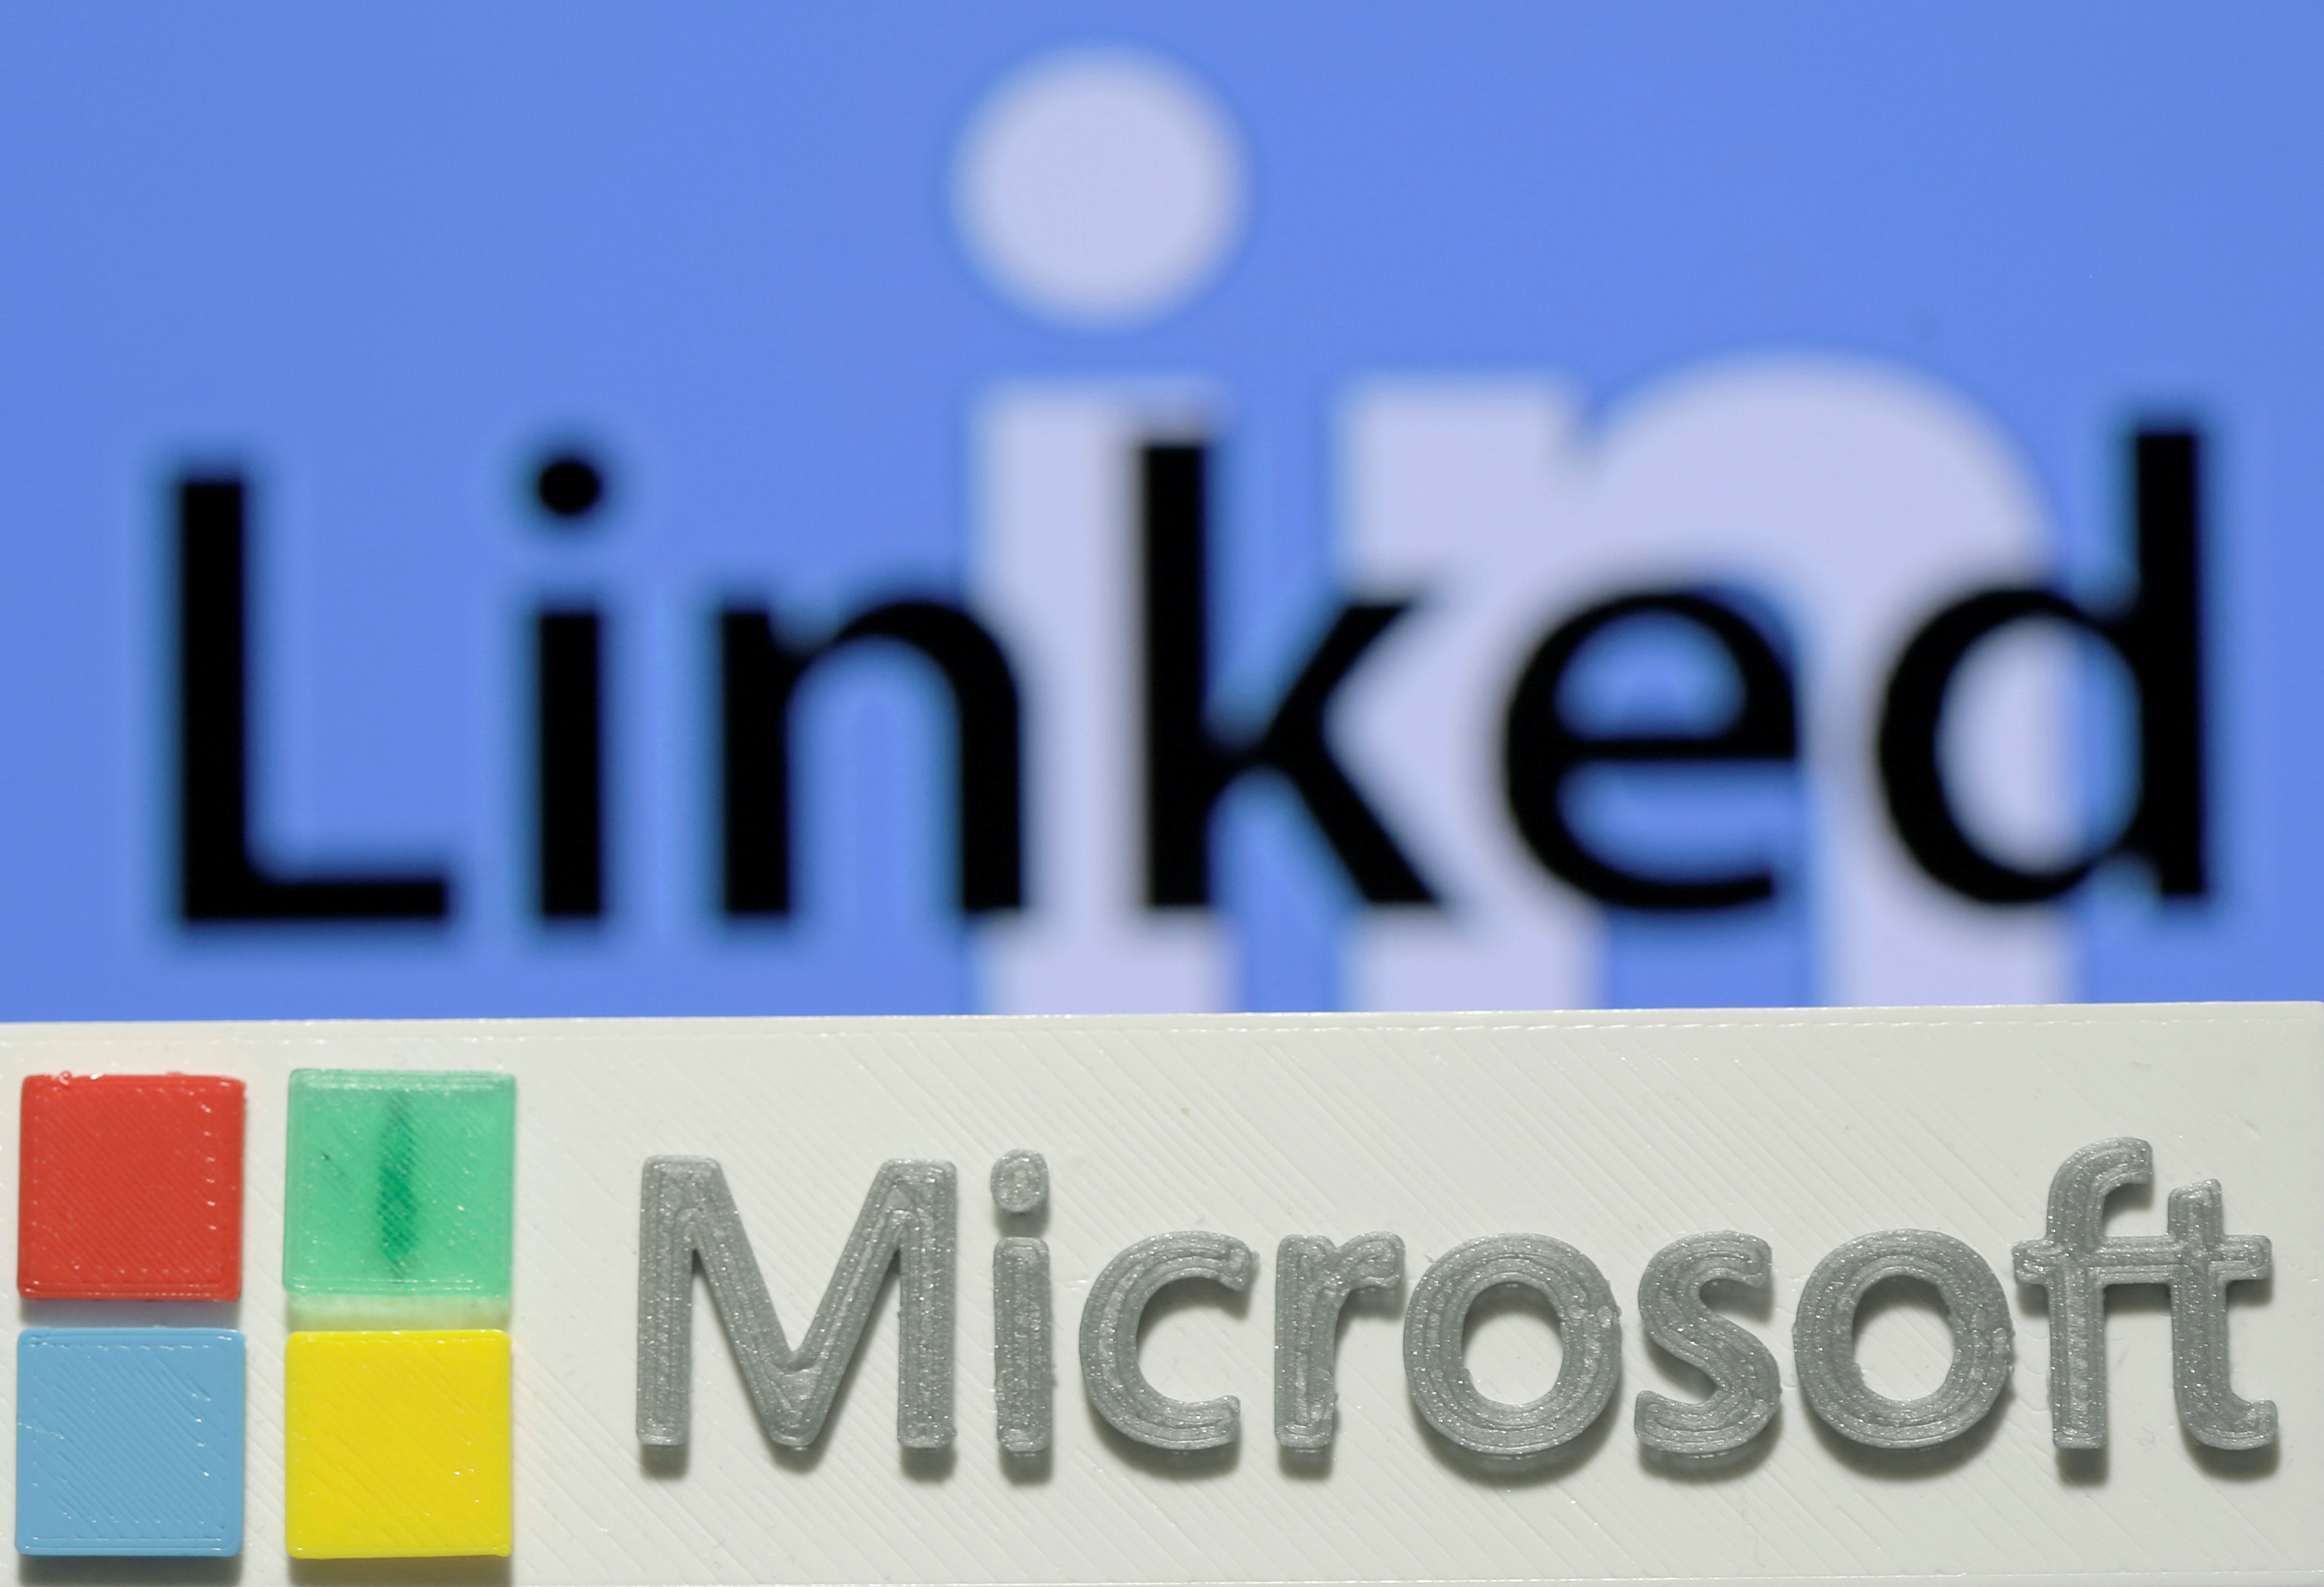 A 3D printed logo of Microsoft is seen in front of a displayed LinkedIn logo in this illustration